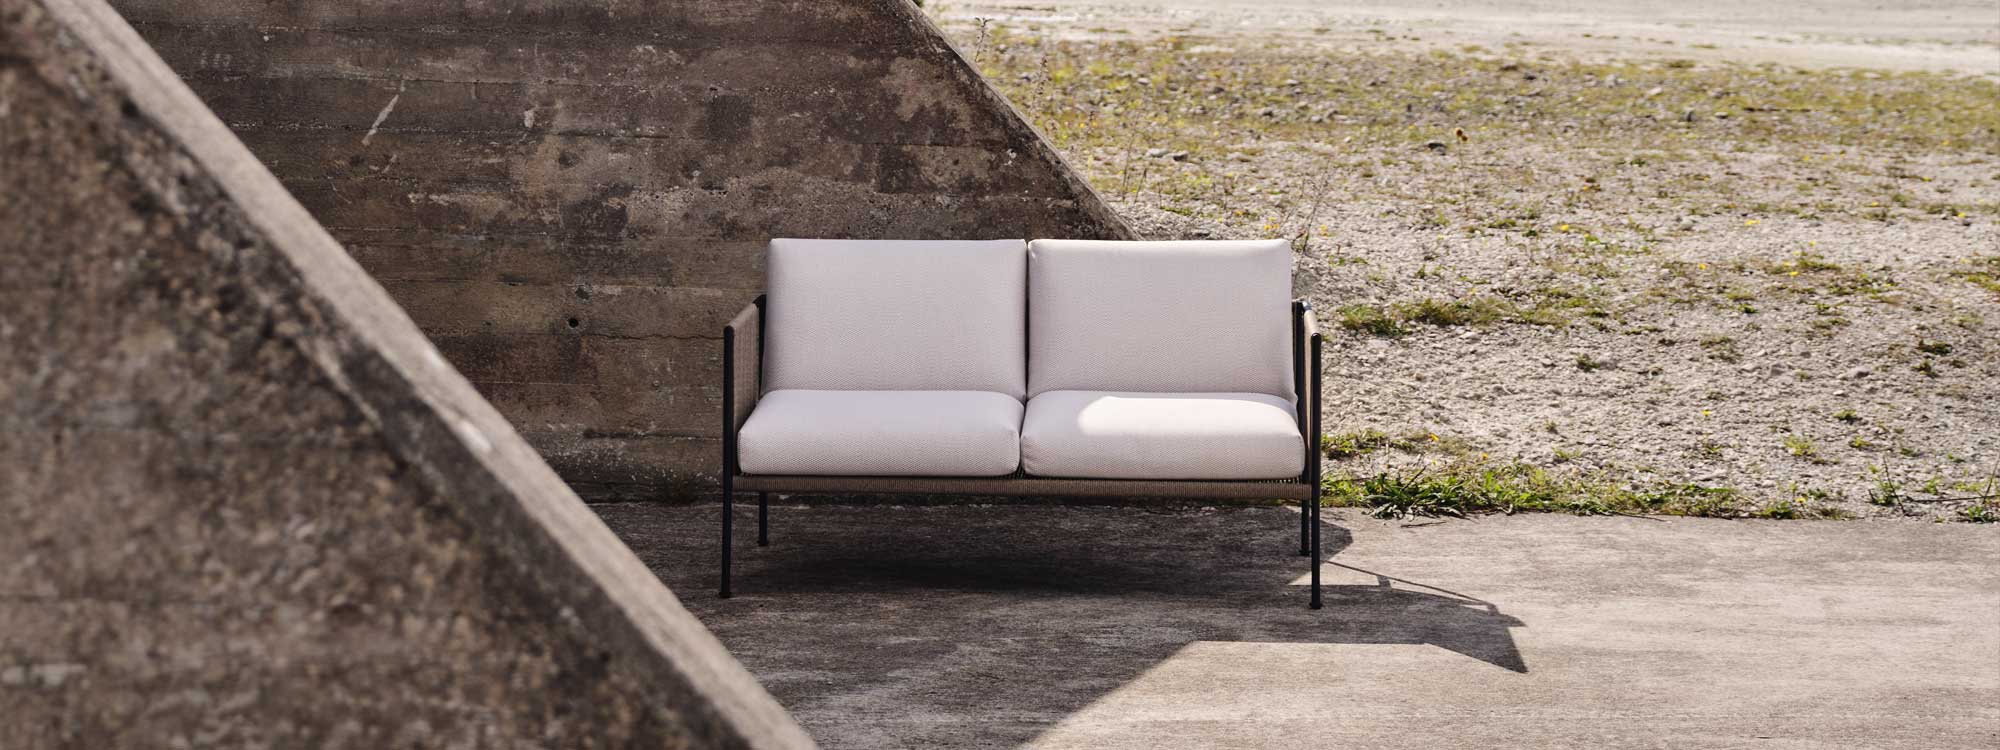 Image of Antibes modern 2 seater garden sofa with concrete bunker and barren landscape in the background